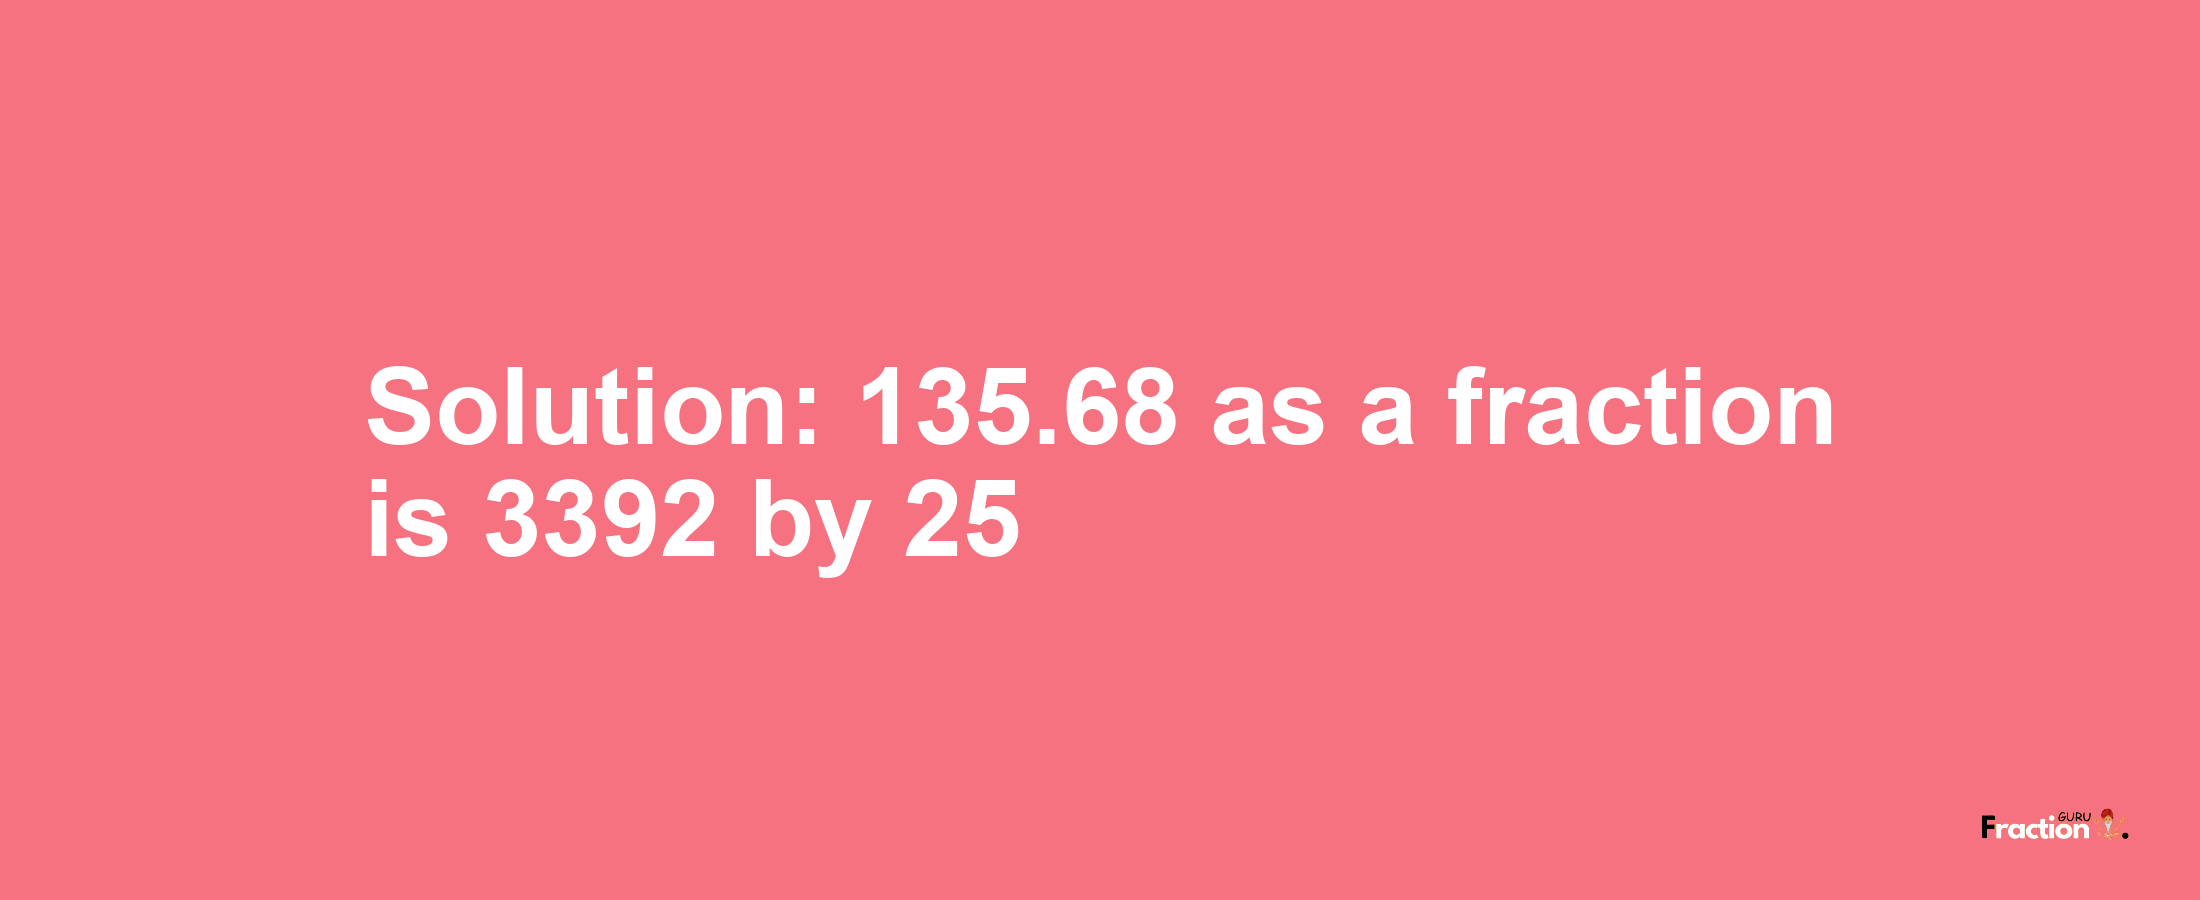 Solution:135.68 as a fraction is 3392/25